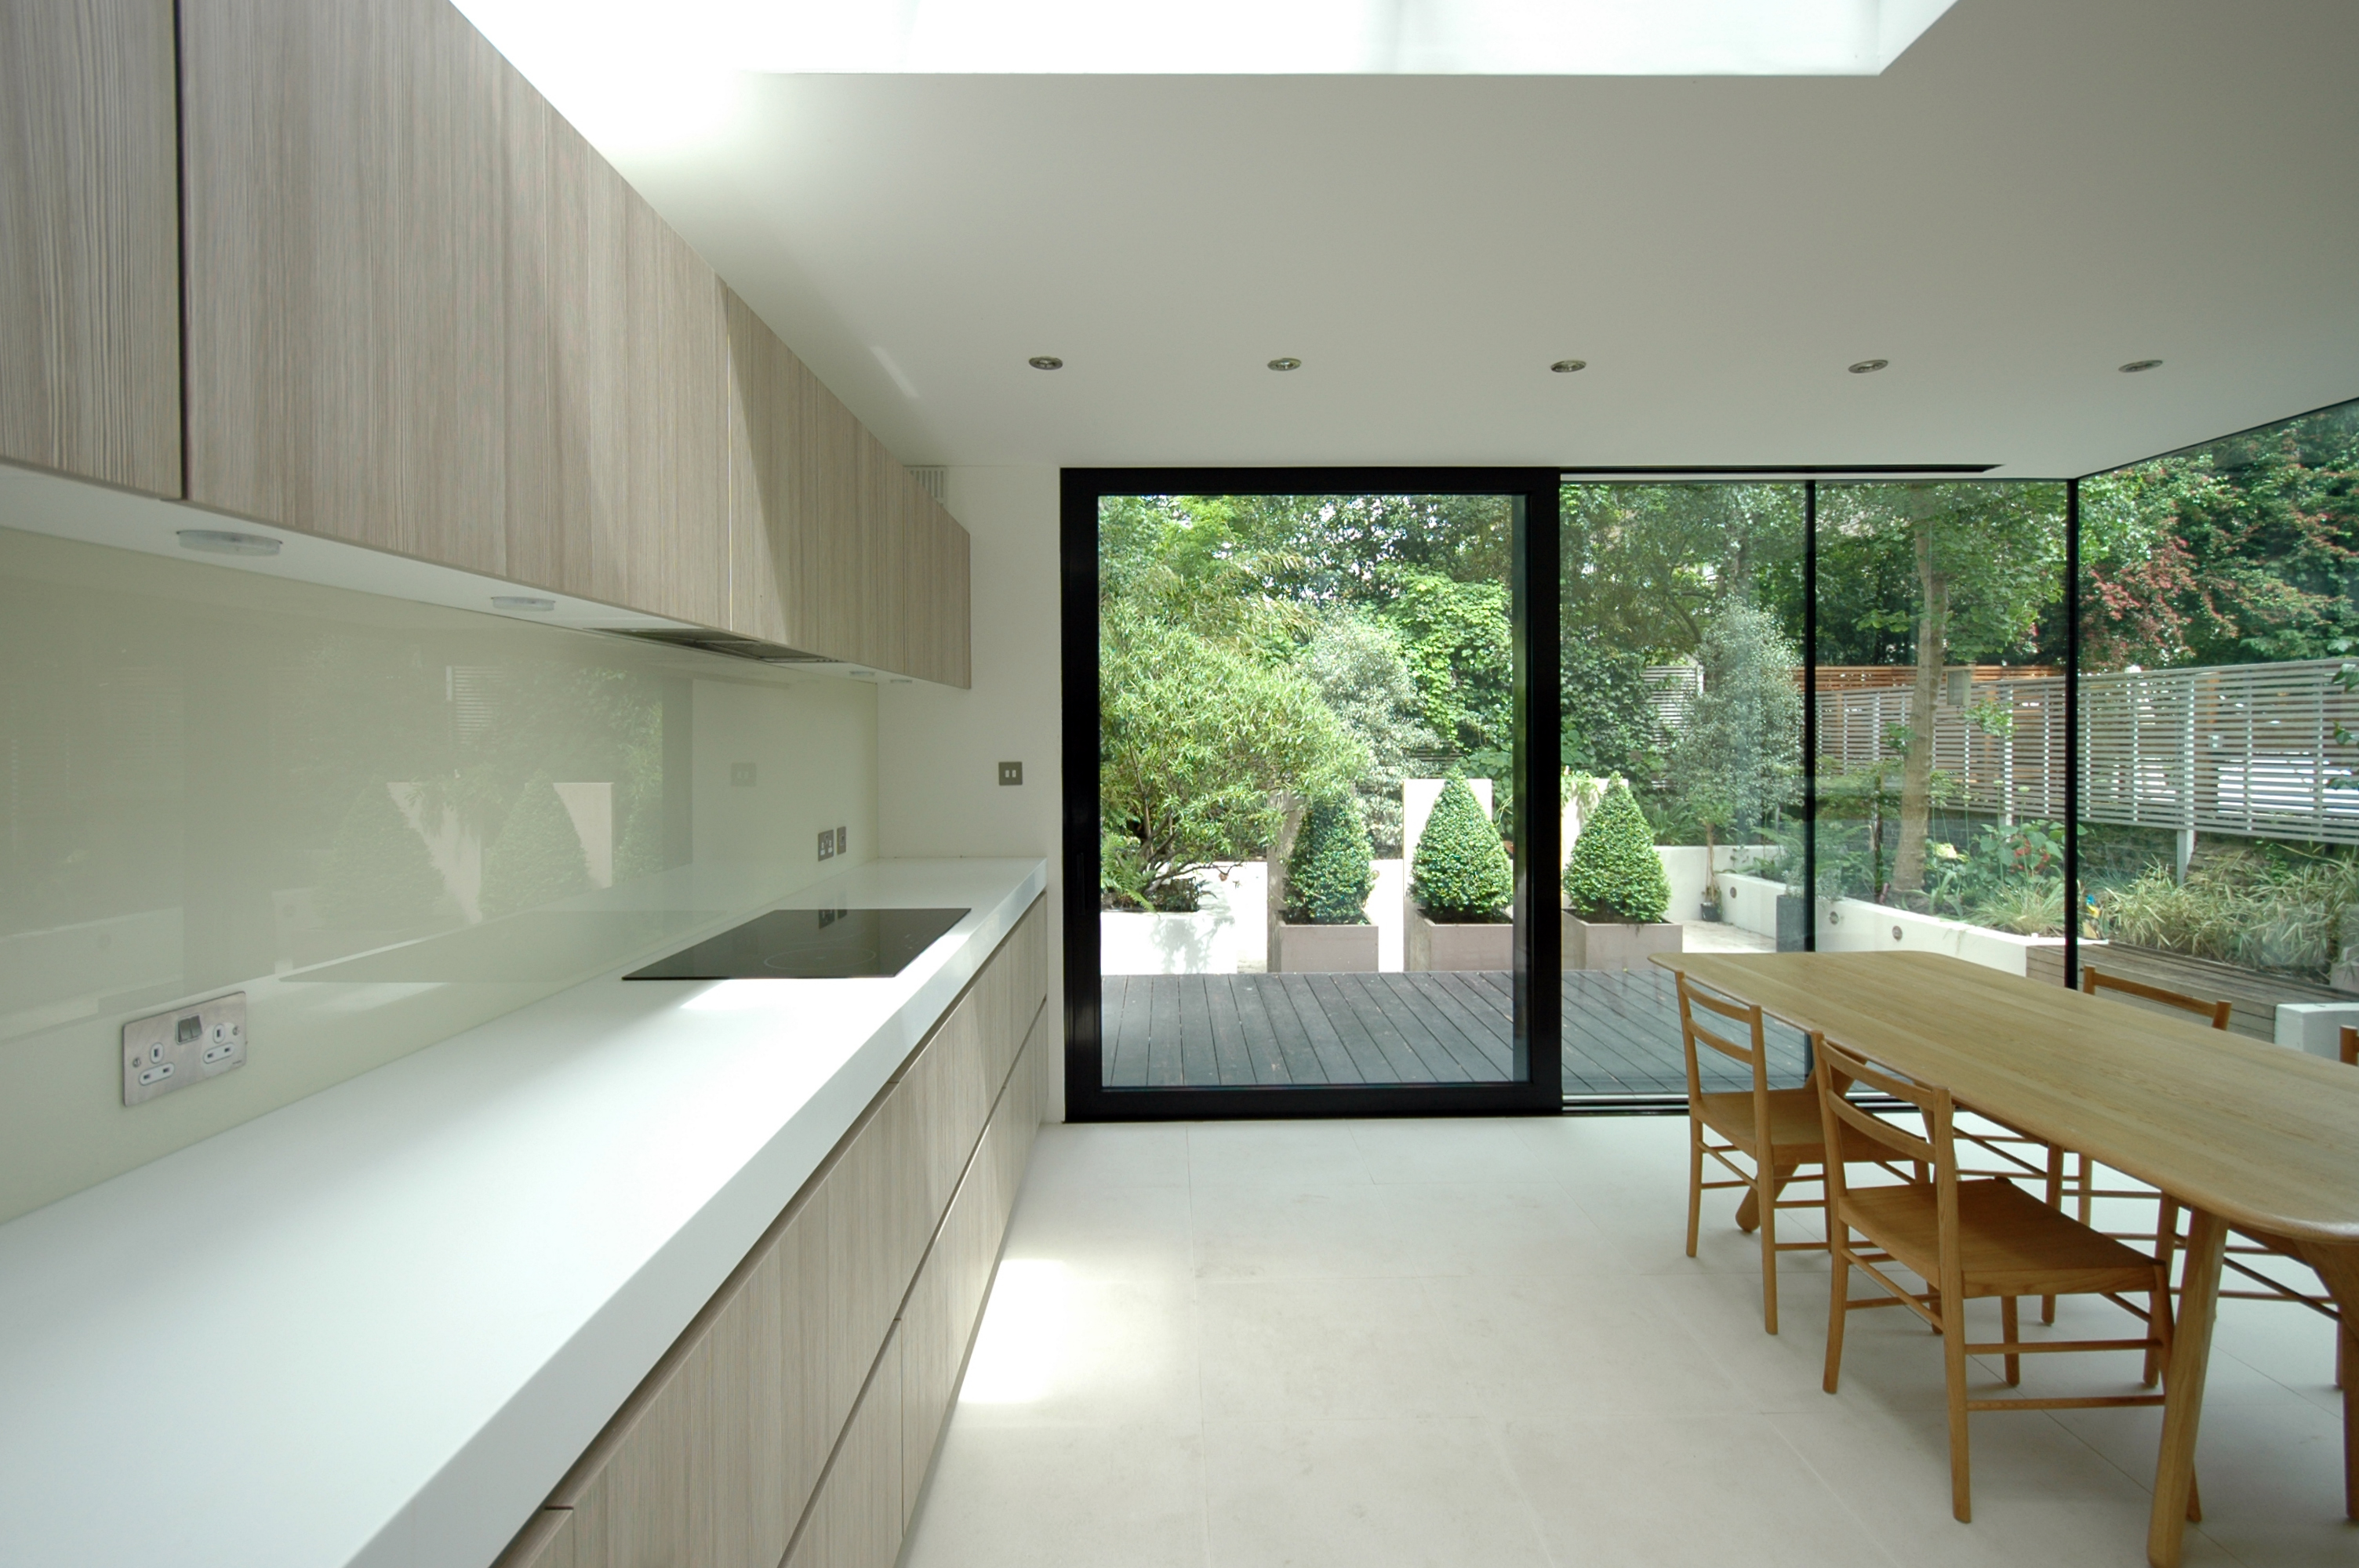 </p> <p>Find your ideal home design pro on designfor-me.com - get matched and see who's interested in your home project. Click image to see more inspiration from our design pros</p> <p>Design by Jake, architect from Islington South and Finsbury</p> <p>#architecture #homedesign #modernhomes #homeinspiration #kitchens #kitchendesign #kitcheninspiration #kitchenideas #kitchengoals #extensions #extensiondesign #extensioninspiration #extensionideas #houseextension #scandihome #scandidecor #scandinaviandesign </p> <p>